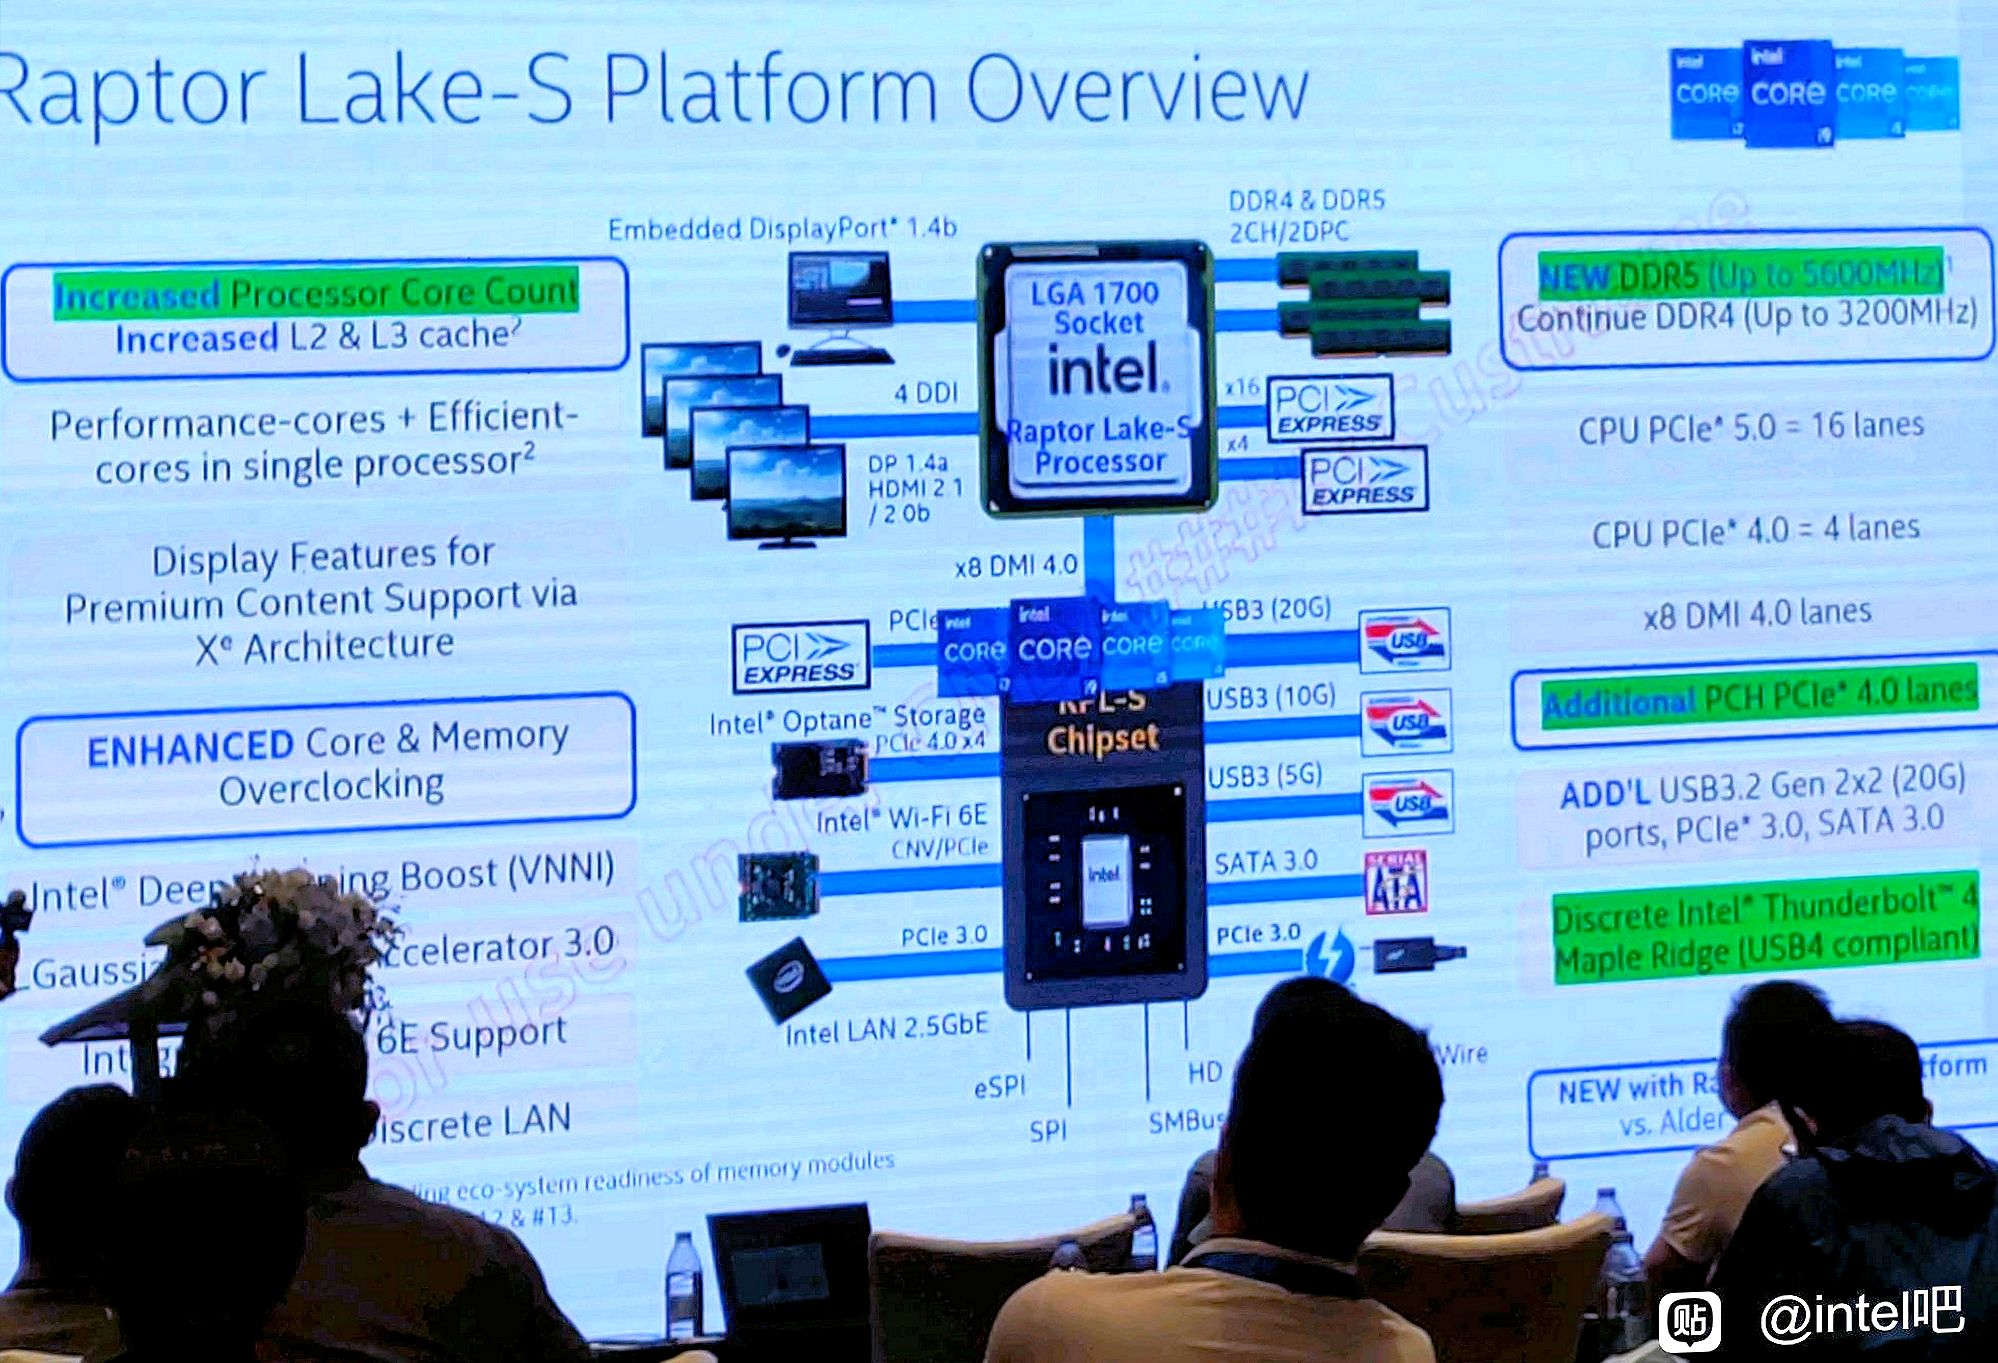 Slides showing features and specifications of Intel's next-generation Raptor Lake-S platform